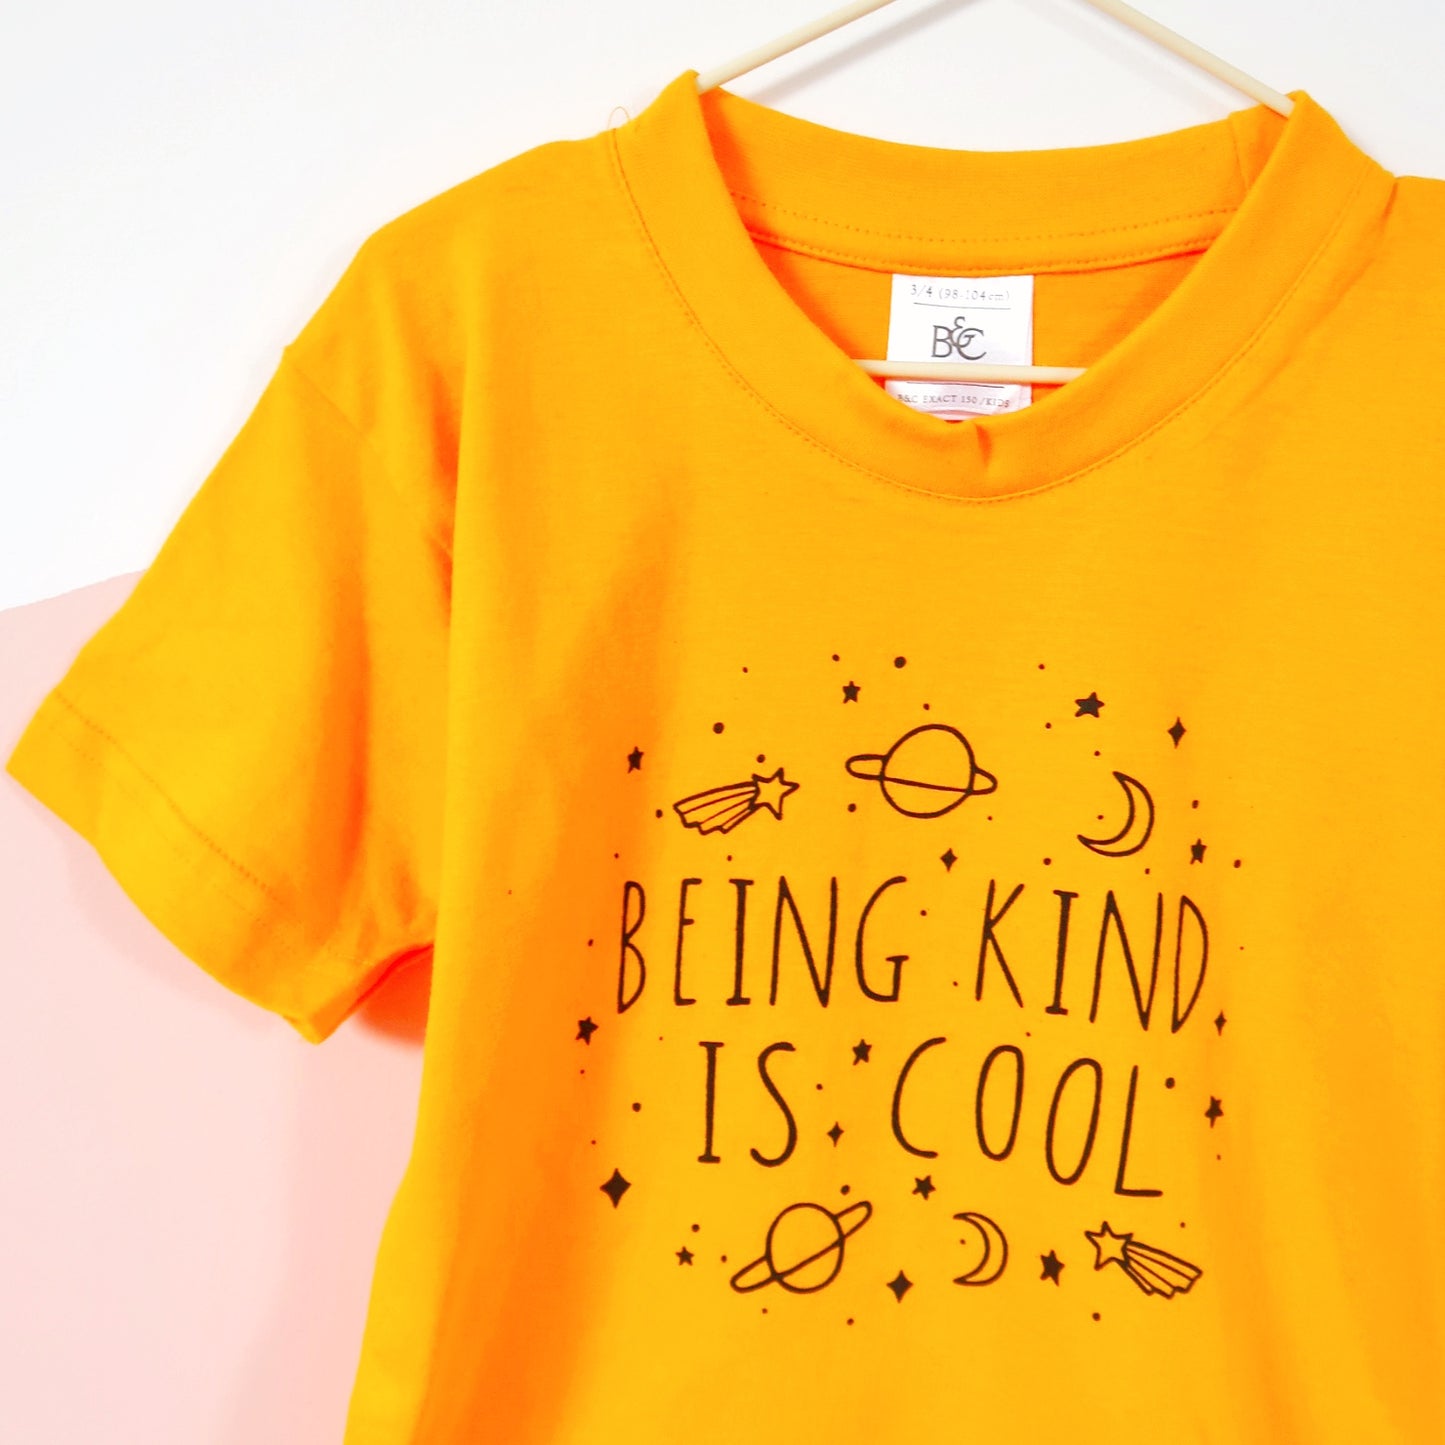 kids being kind is cool t-shirt - yellow